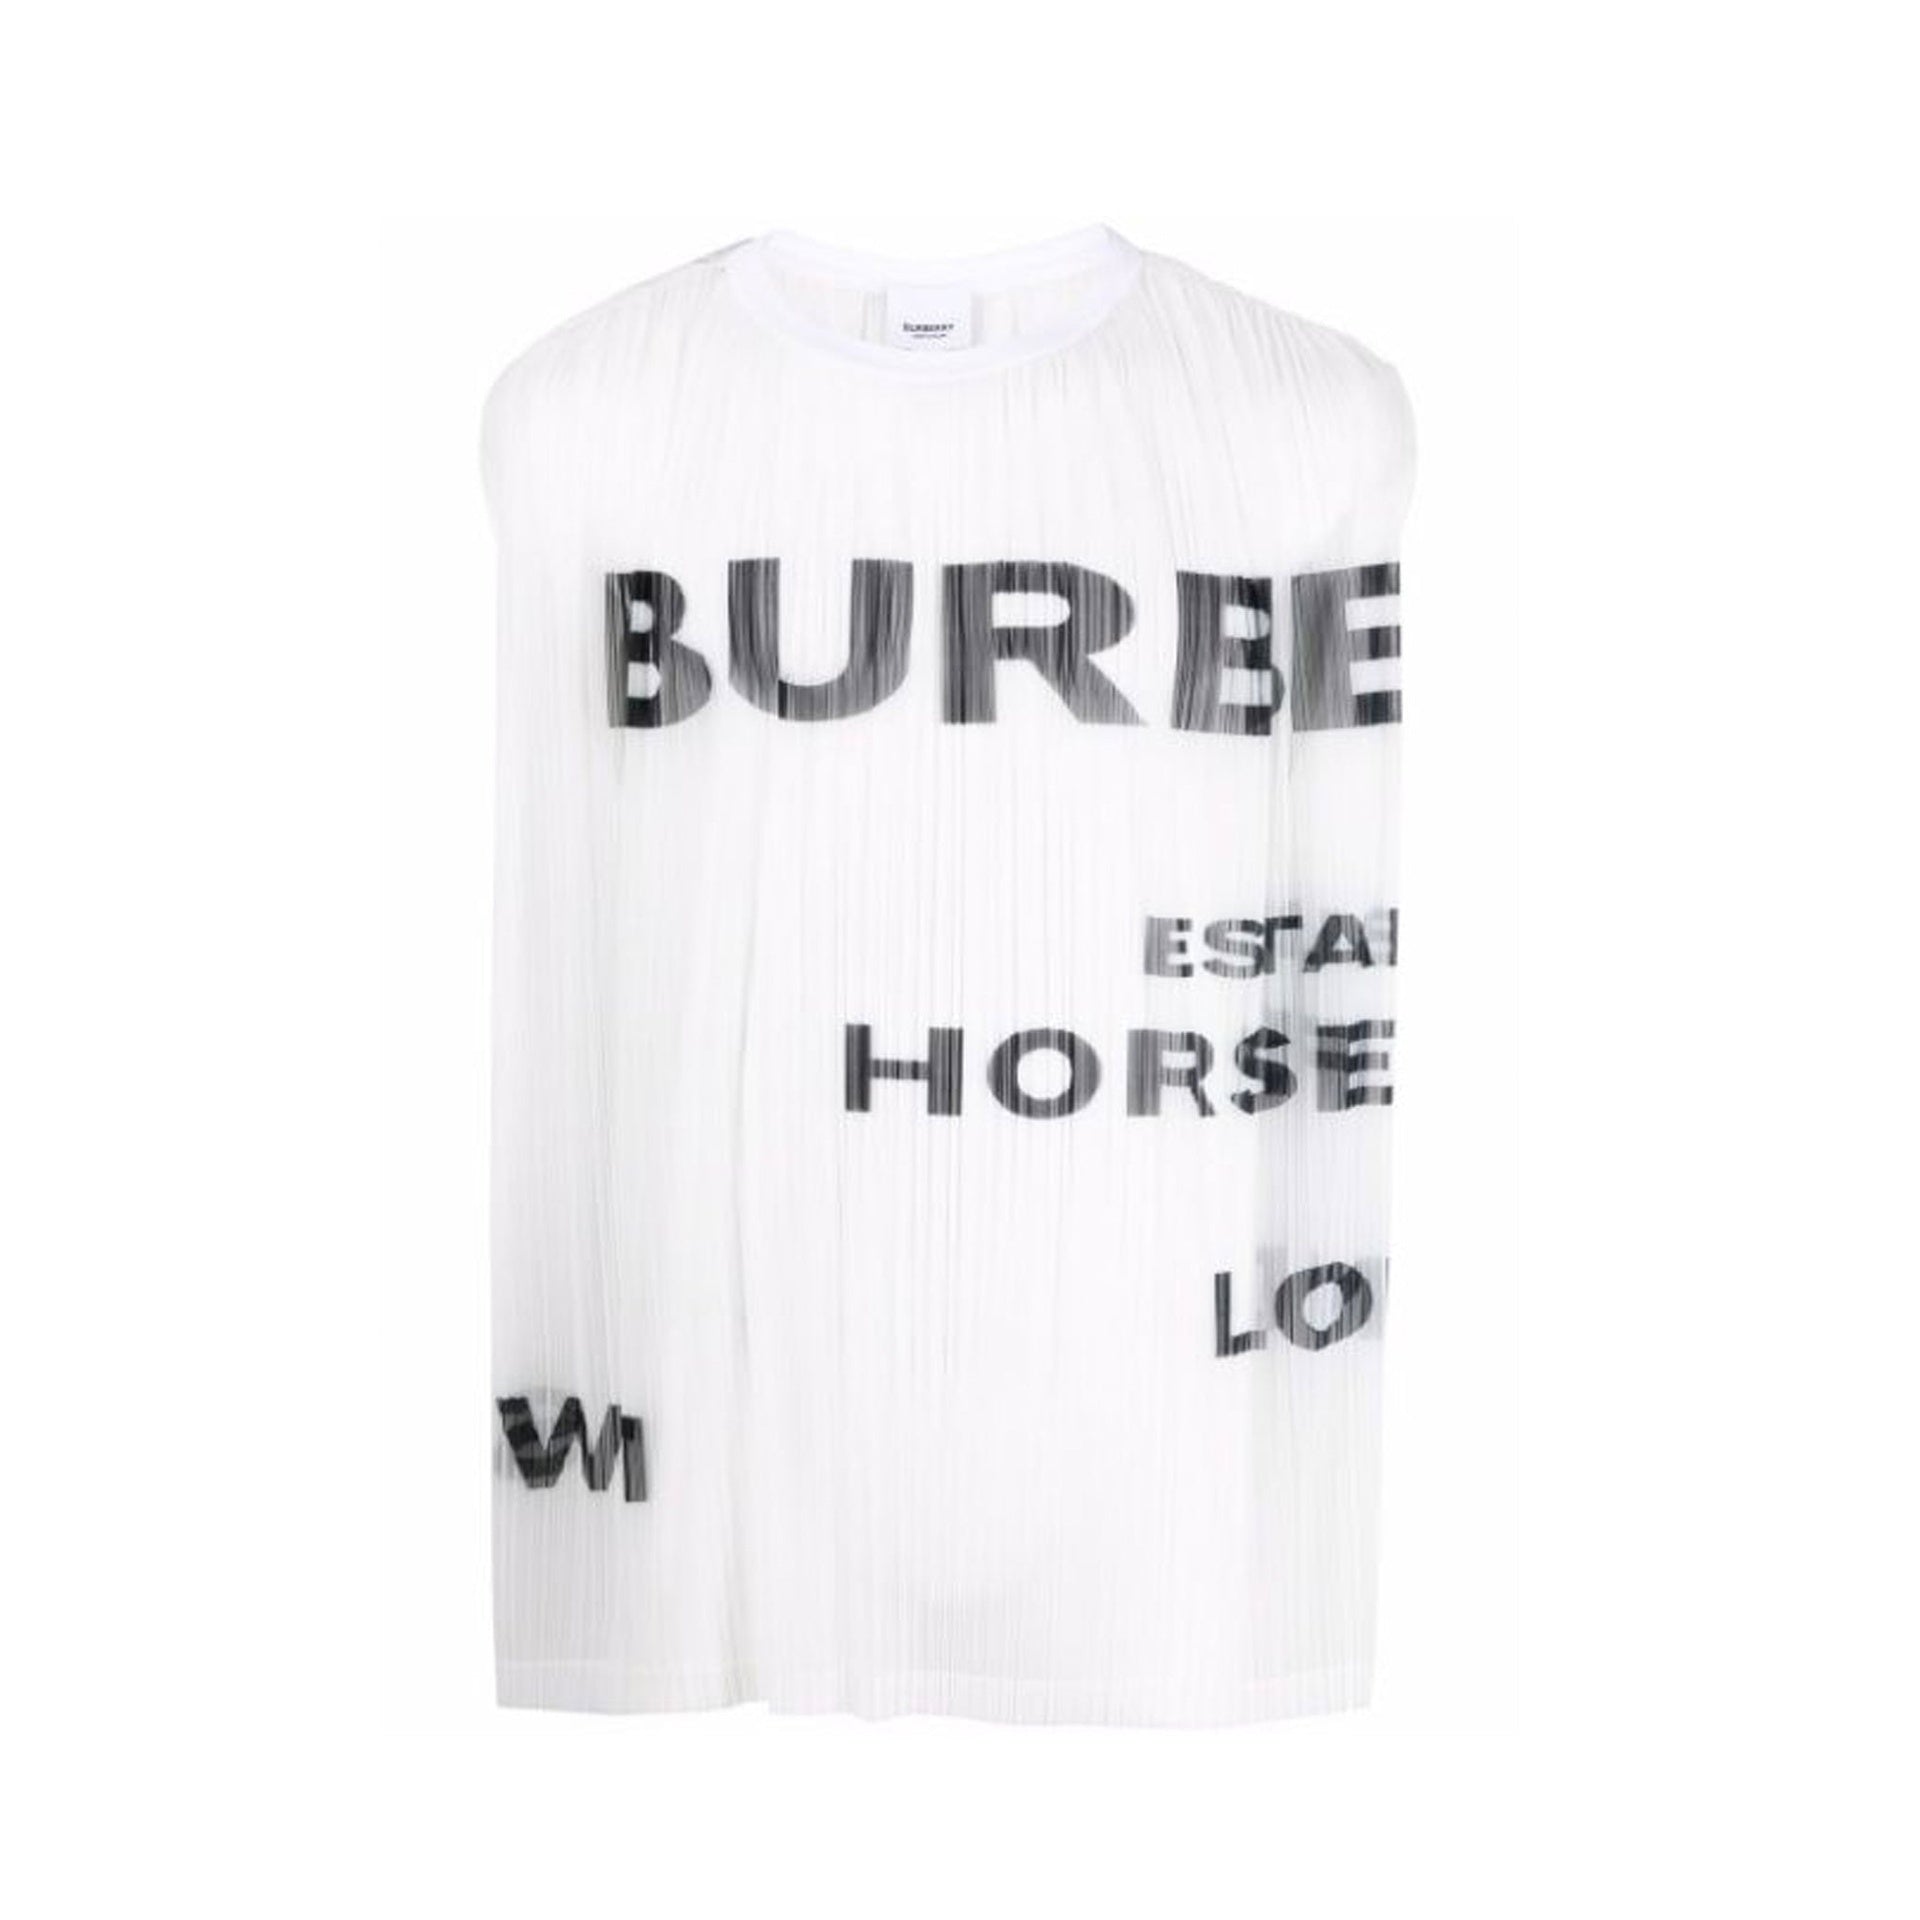 BURBERRY-OUTLET-SALE-Burberry-Horseferry-Print-Mesh-Tank-Top-Shirts-WHITE-S-ARCHIVE-COLLECTION.jpg